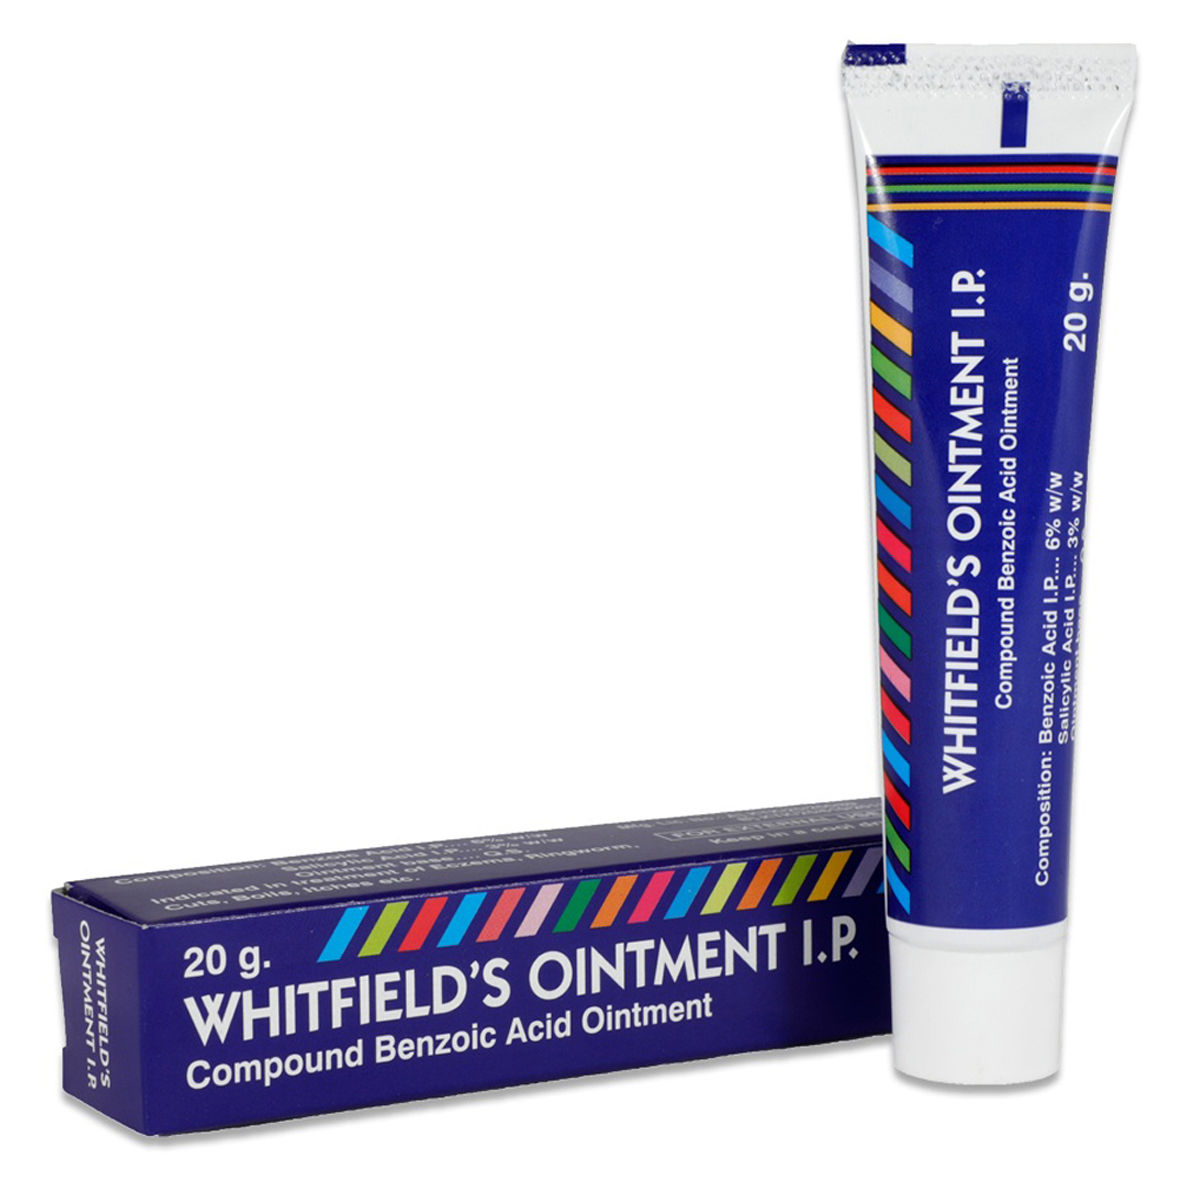 Whitfield S Ointment 10 gm Price, Uses, Side Effects, Composition - Apollo  Pharmacy